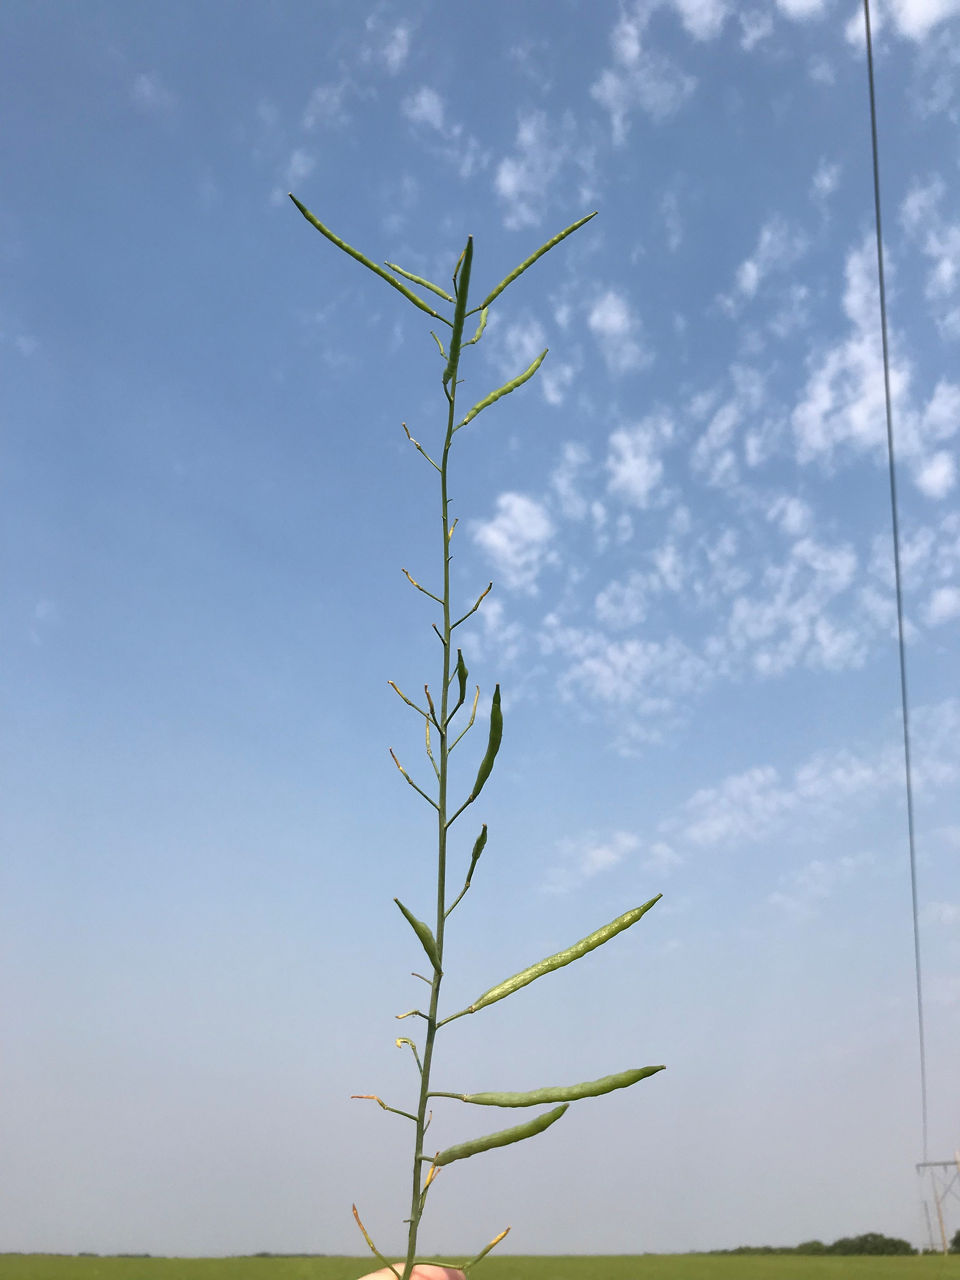 Canola aborted pods due to heat stress